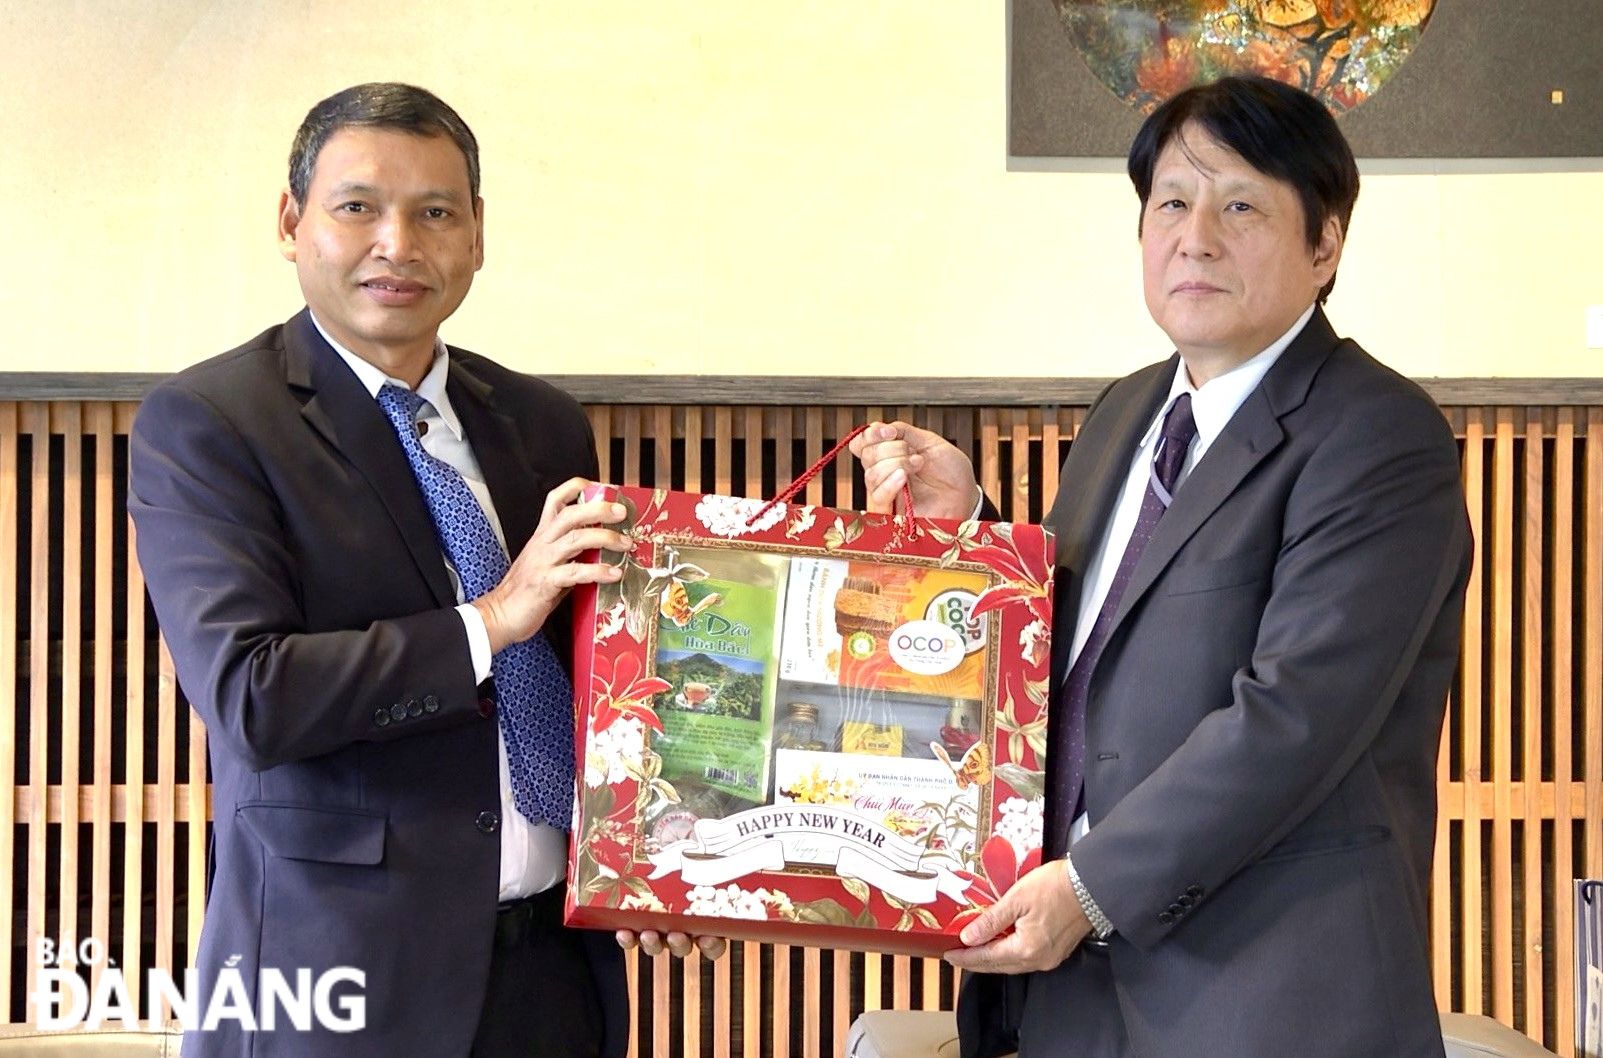 Vice Chairman of the Da Nang People's Committee Ho Ky Minh (left) presenting a New Year's gift to Consul-General of Japan in Da Nang Yakabe Yoshinori. Photo: T.PHUONG